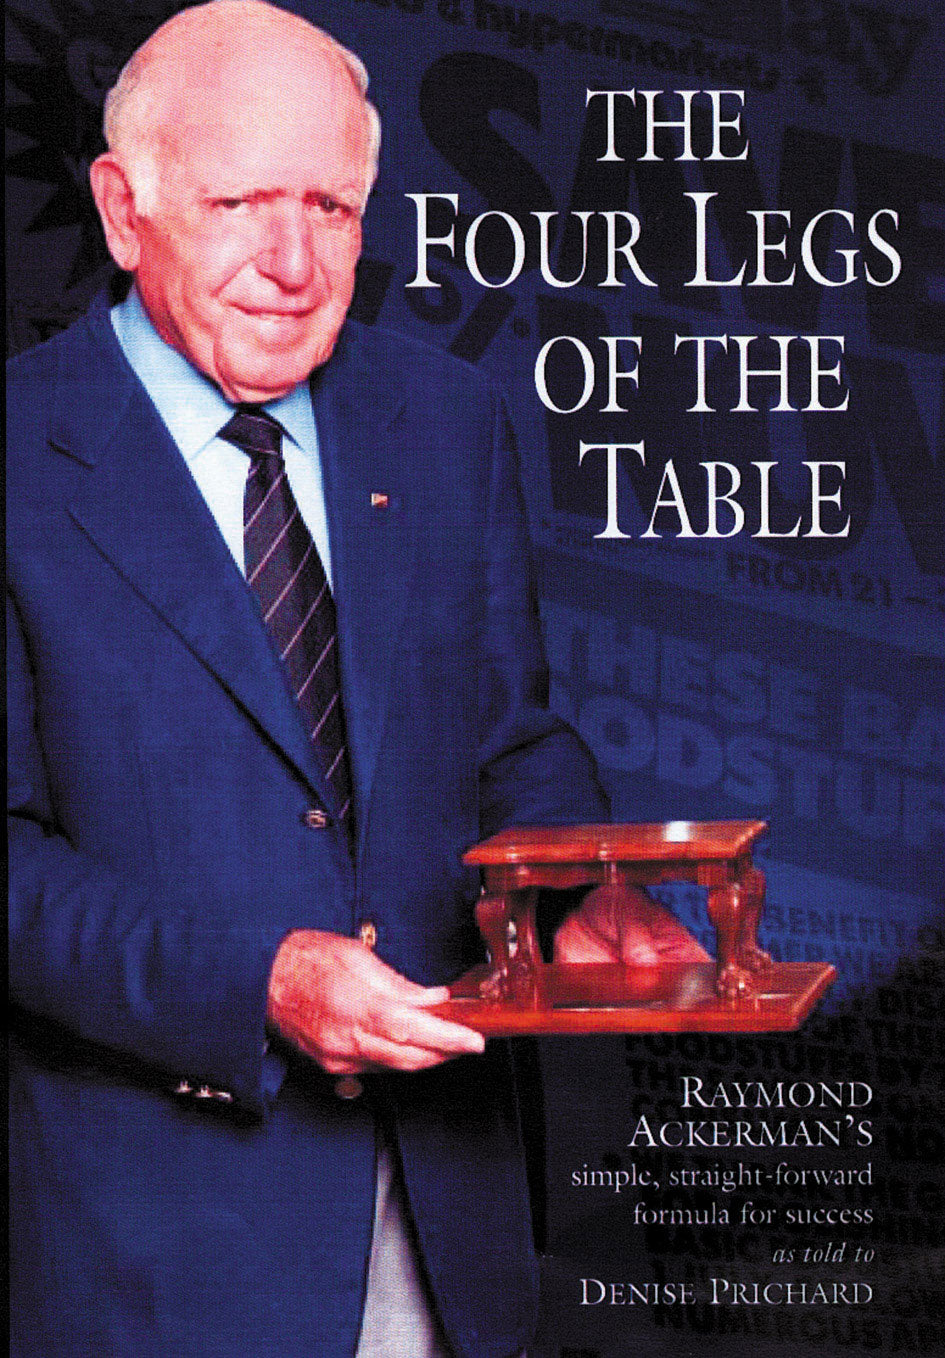 THE FOUR LEGS OF THE TABLE